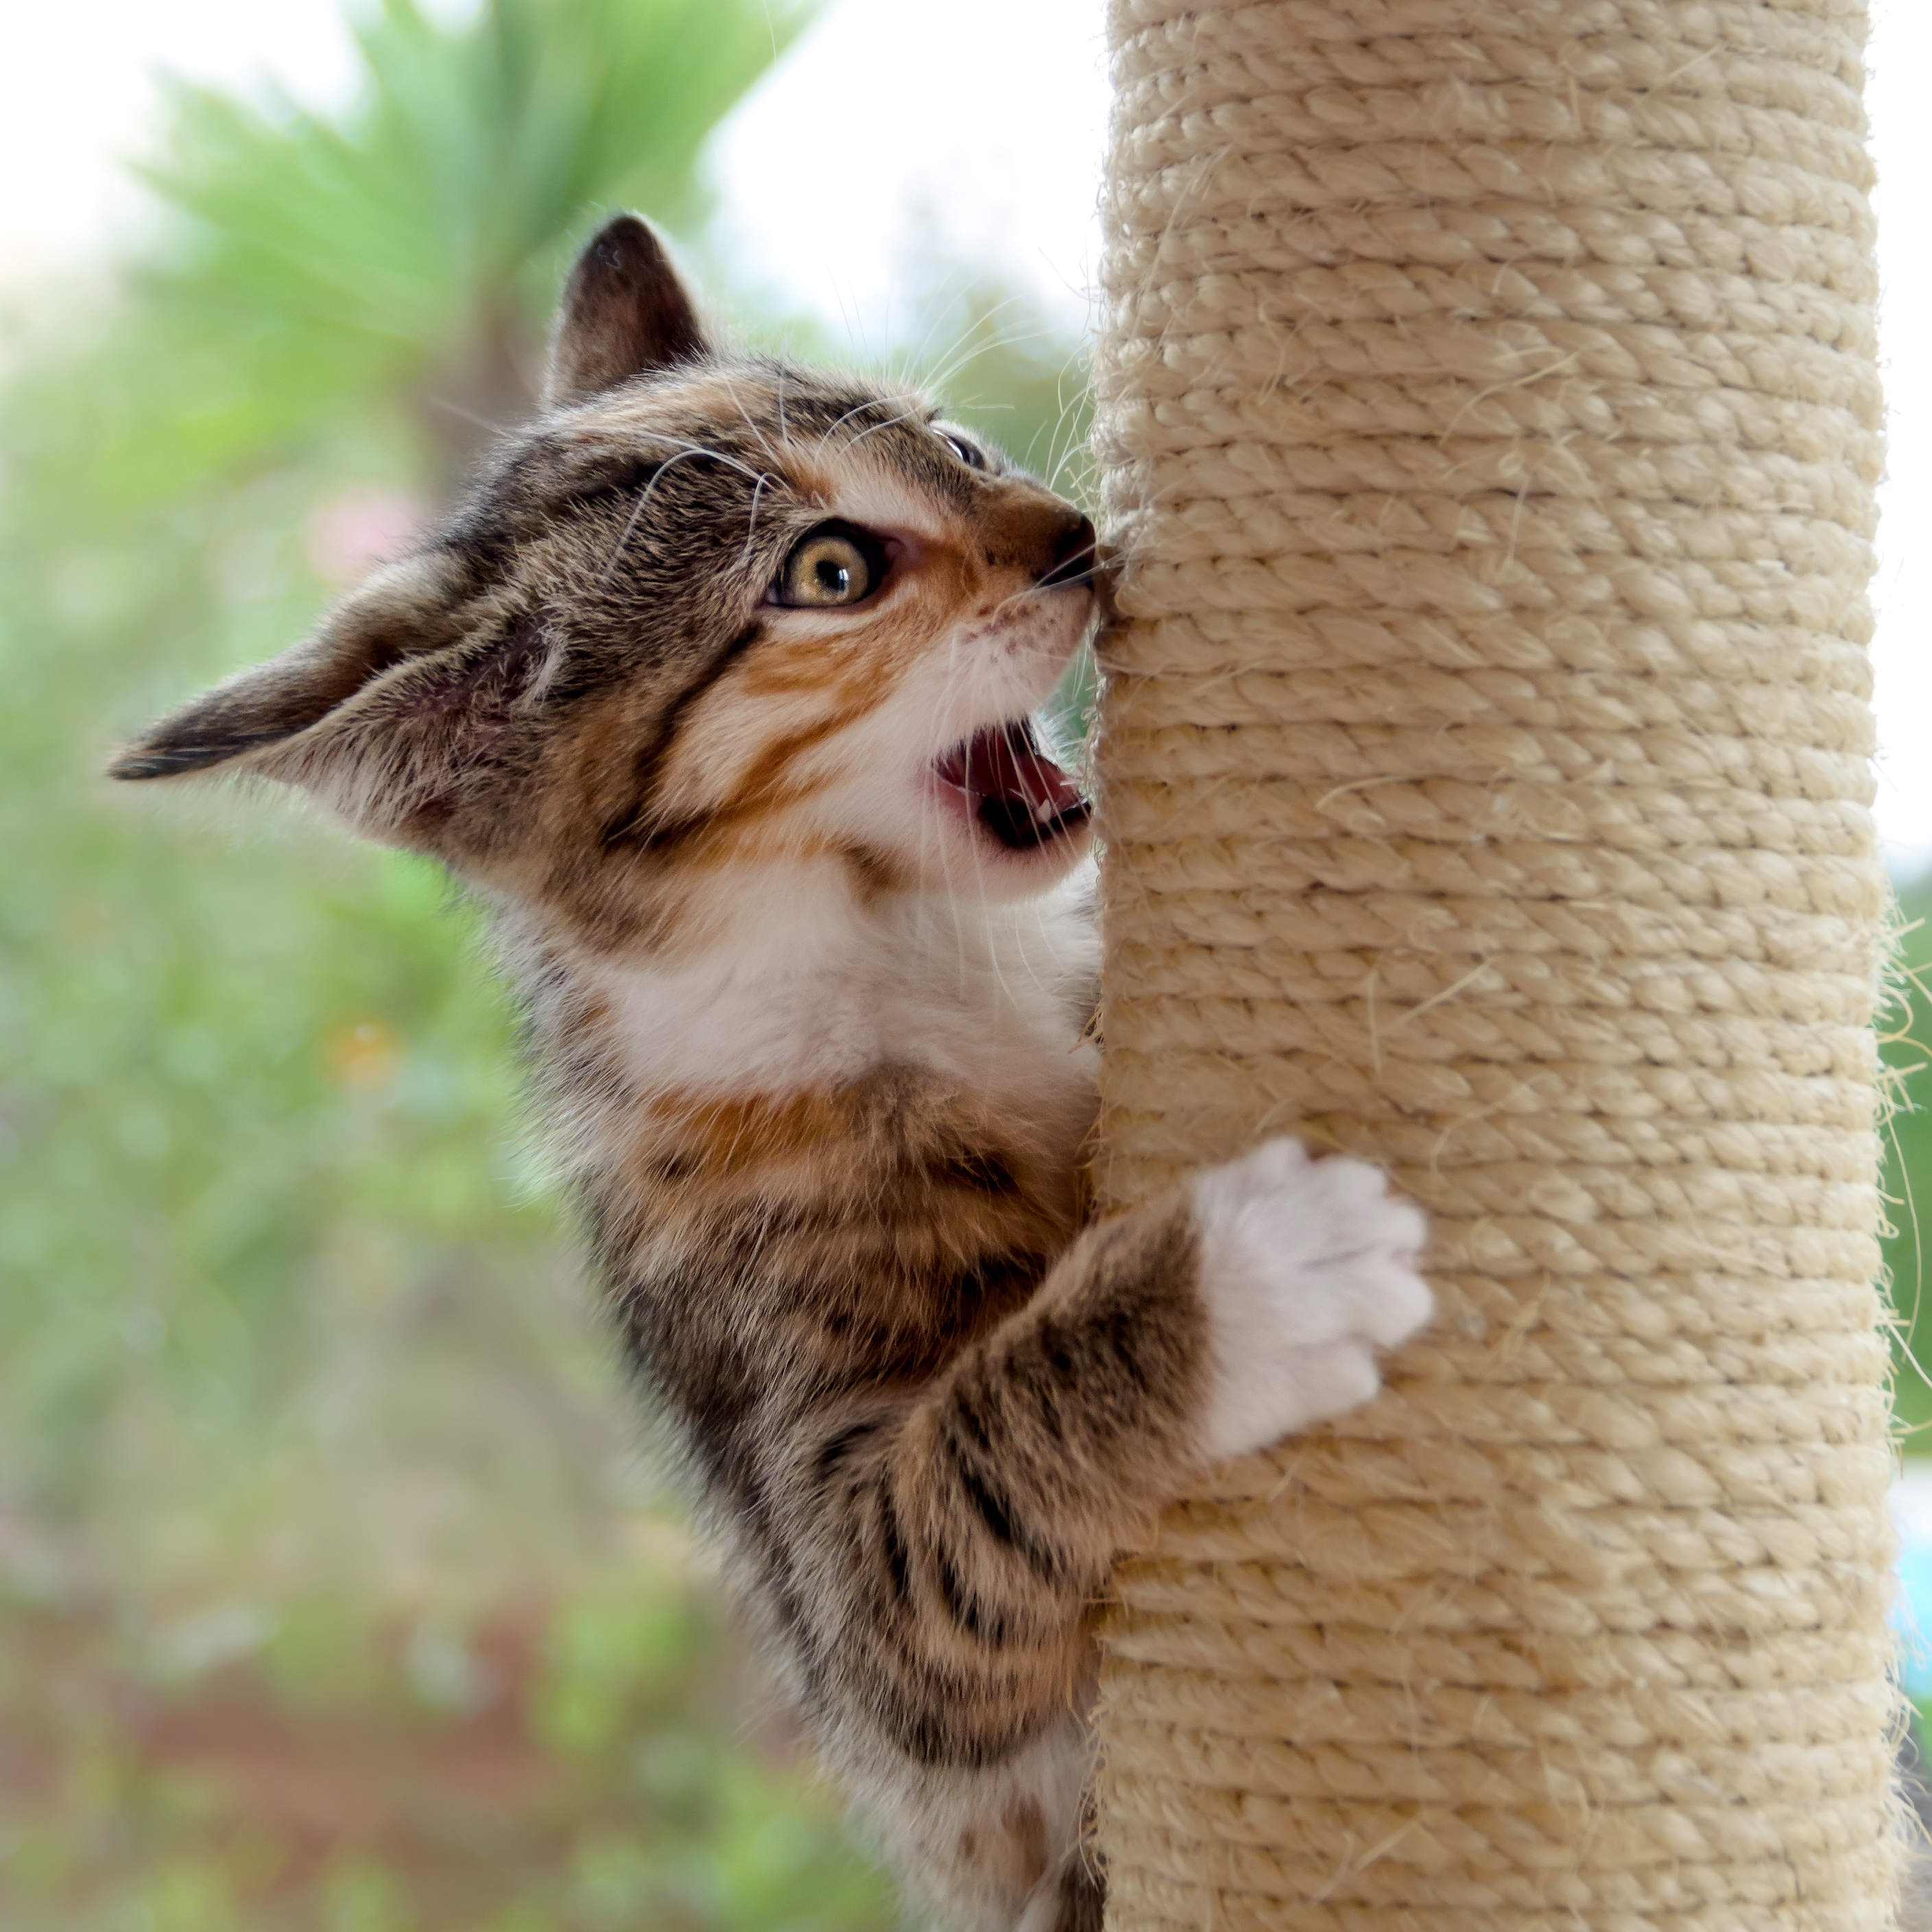 30 new scratching posts added to the assortment